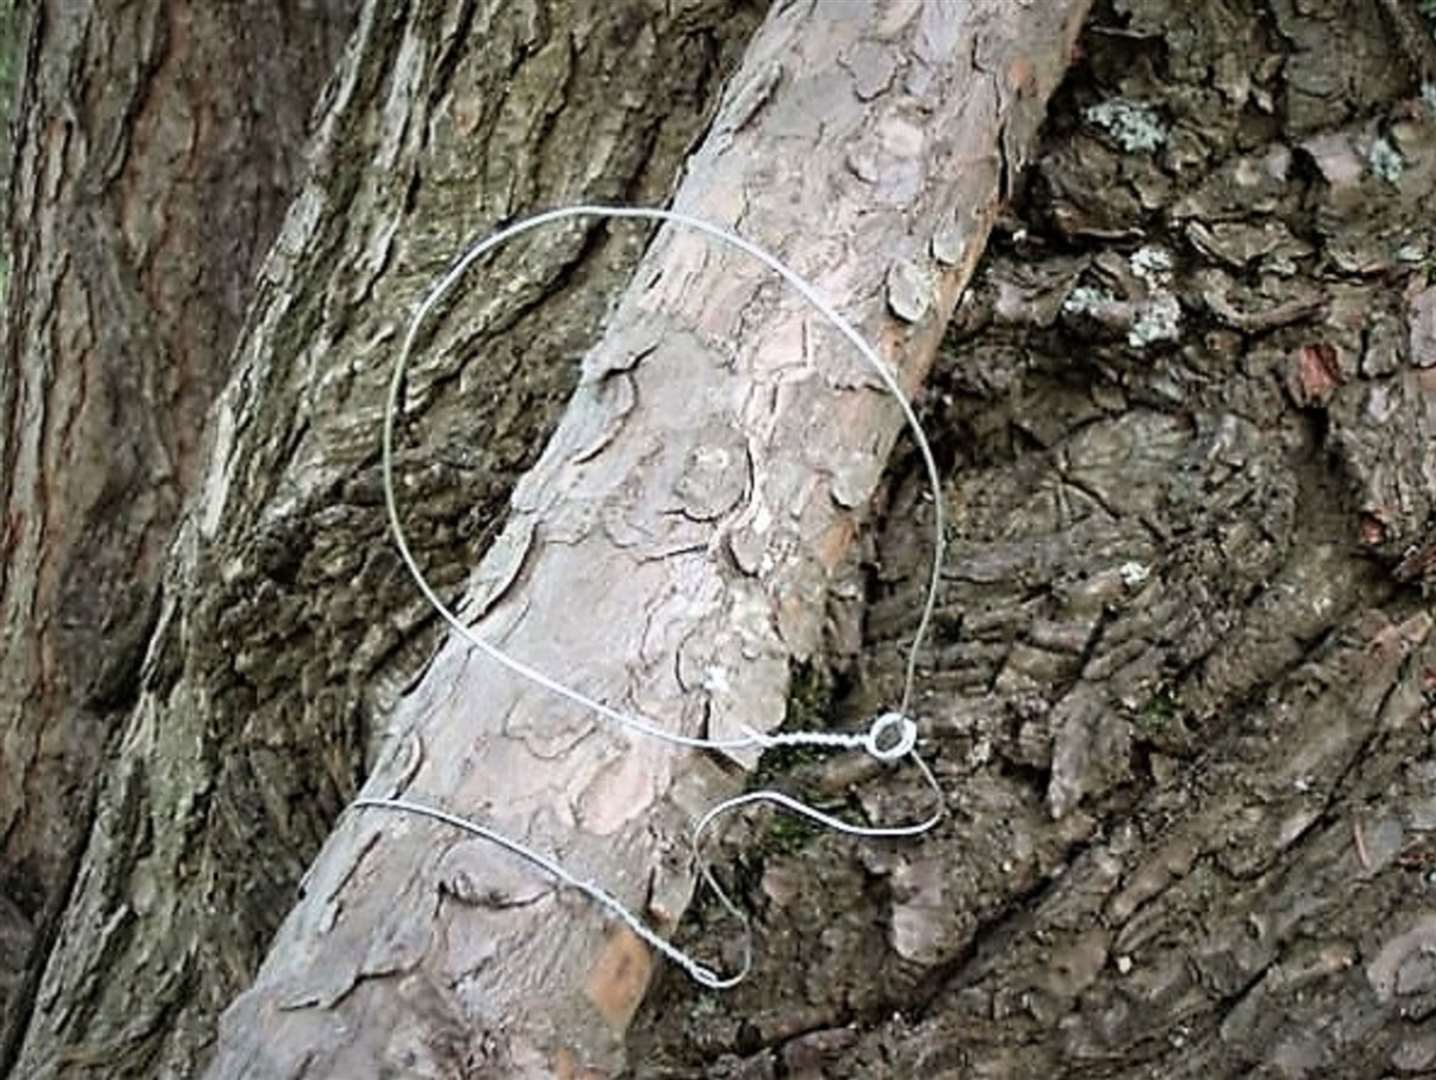 A snare for trapping wildlife.